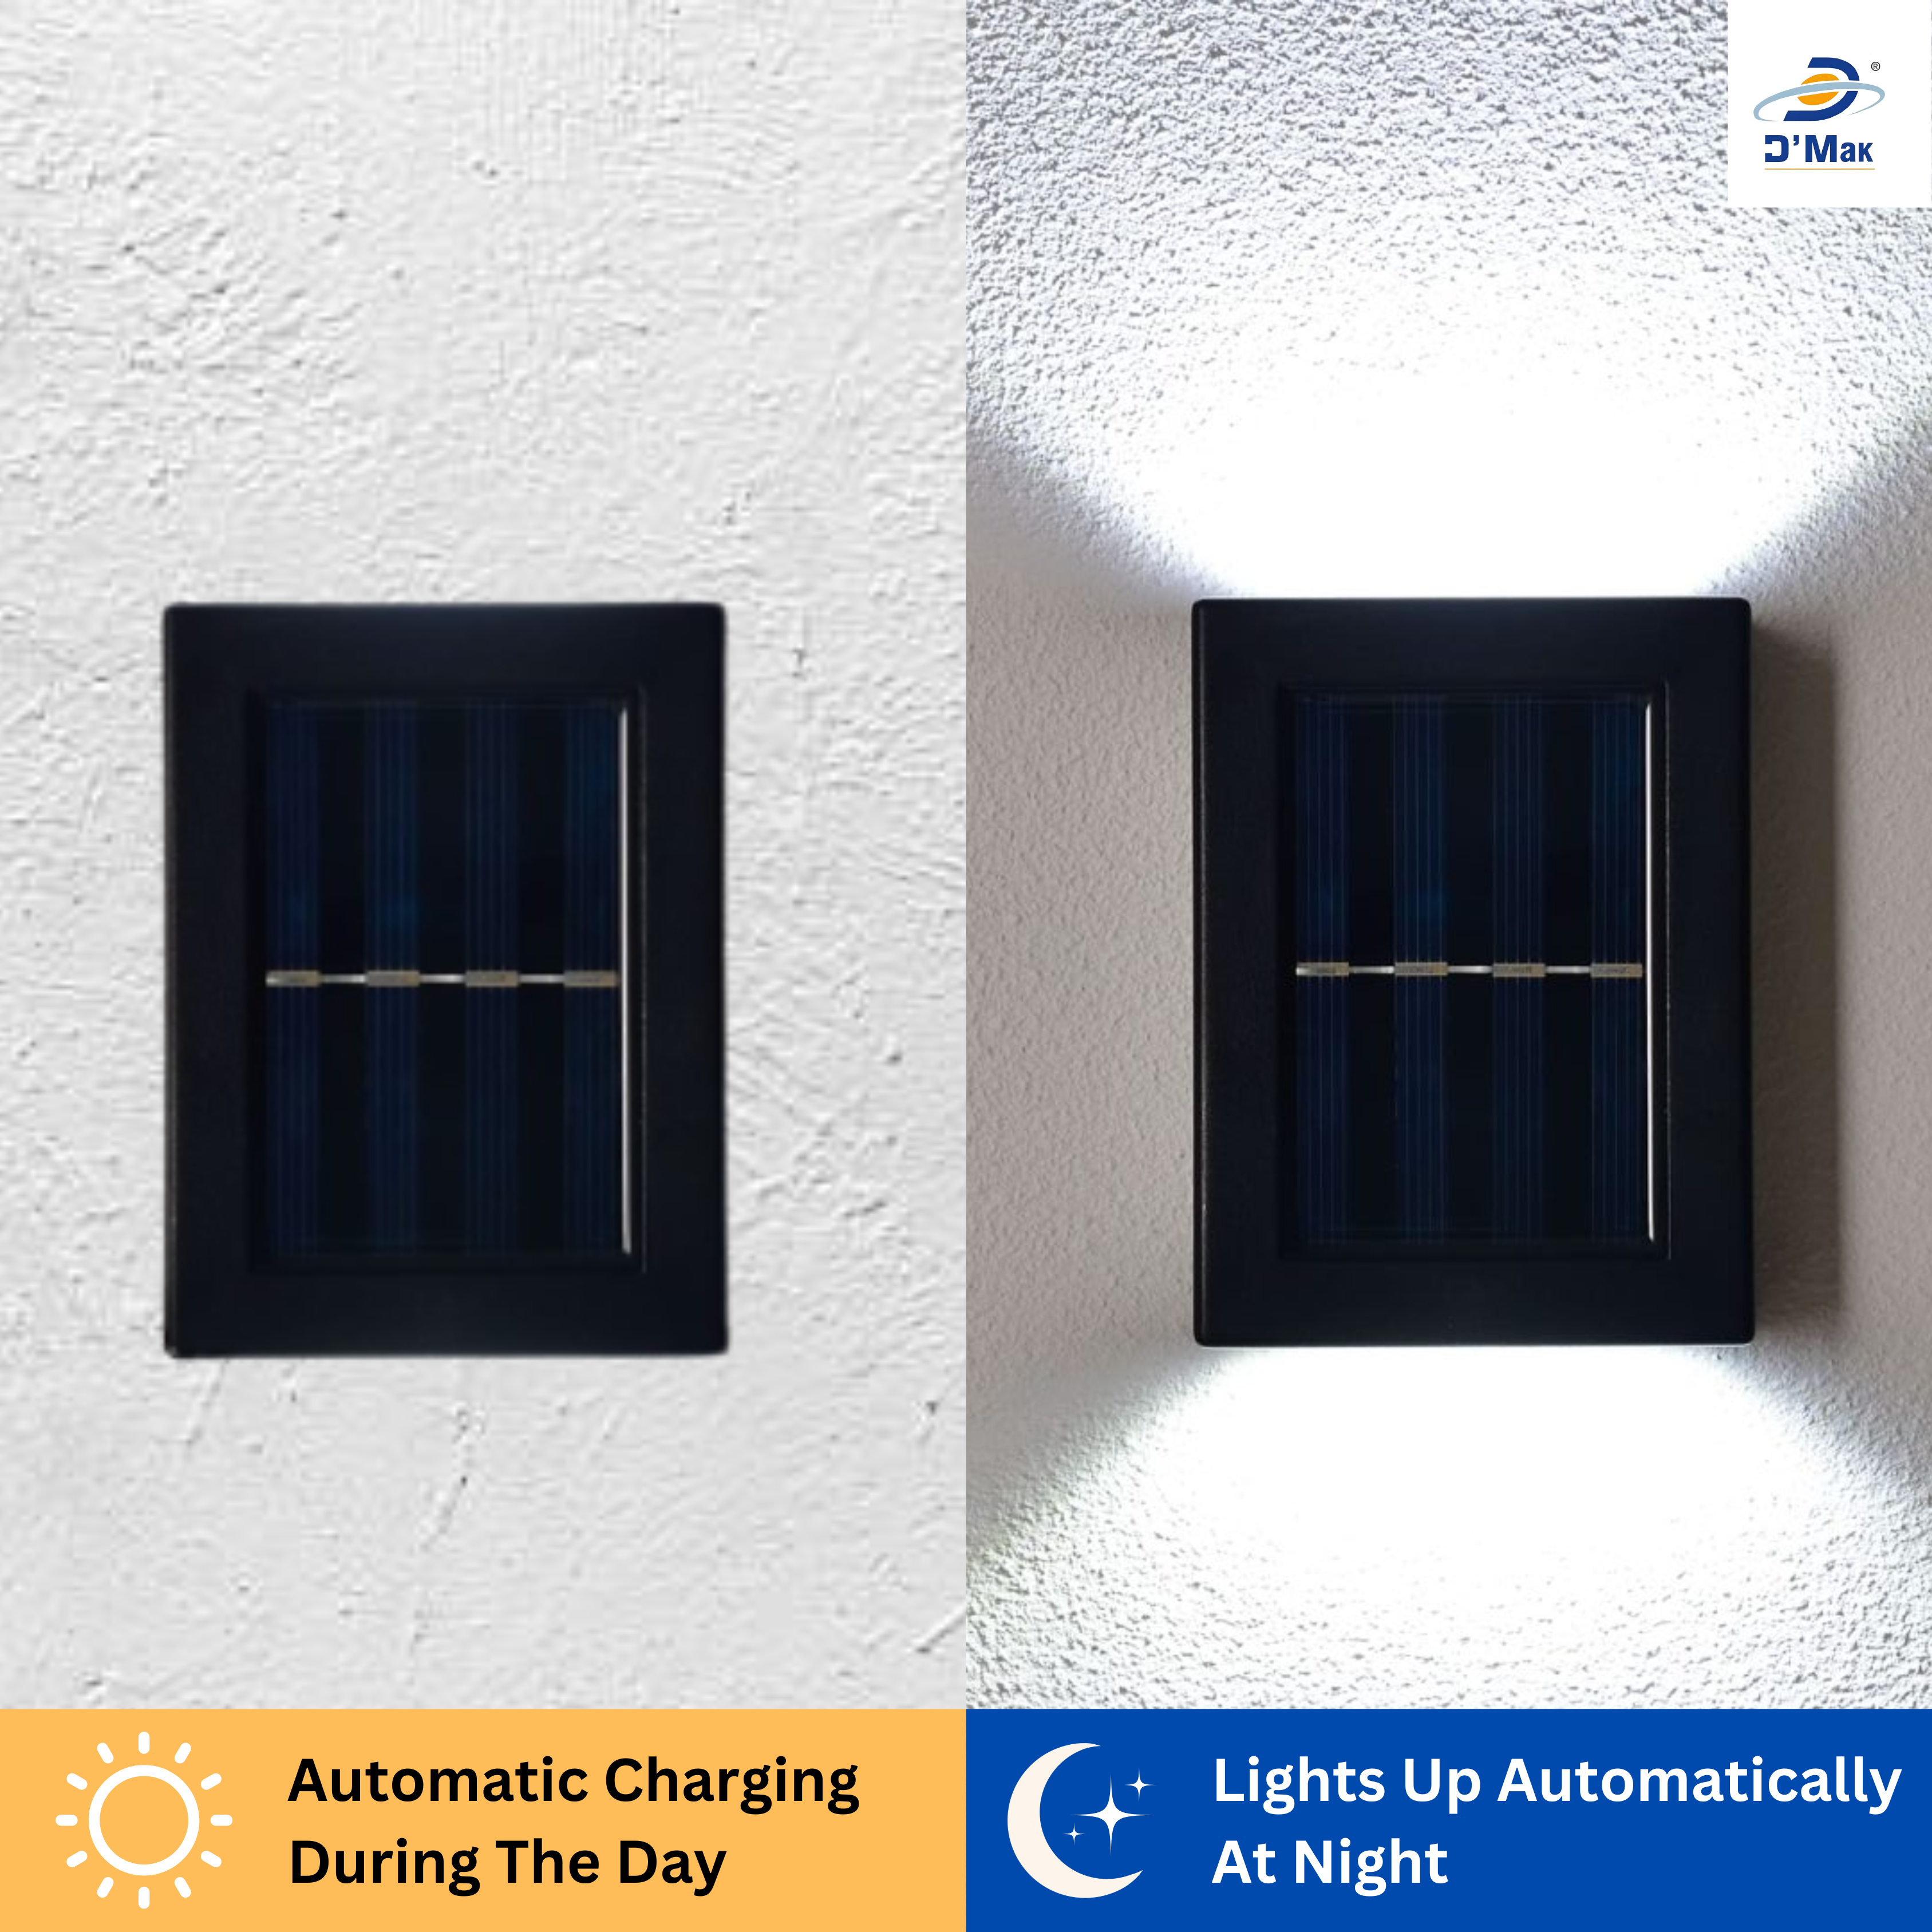 D'Mak Automatic Solar Up Down Wall Light for Outdoor Purposes